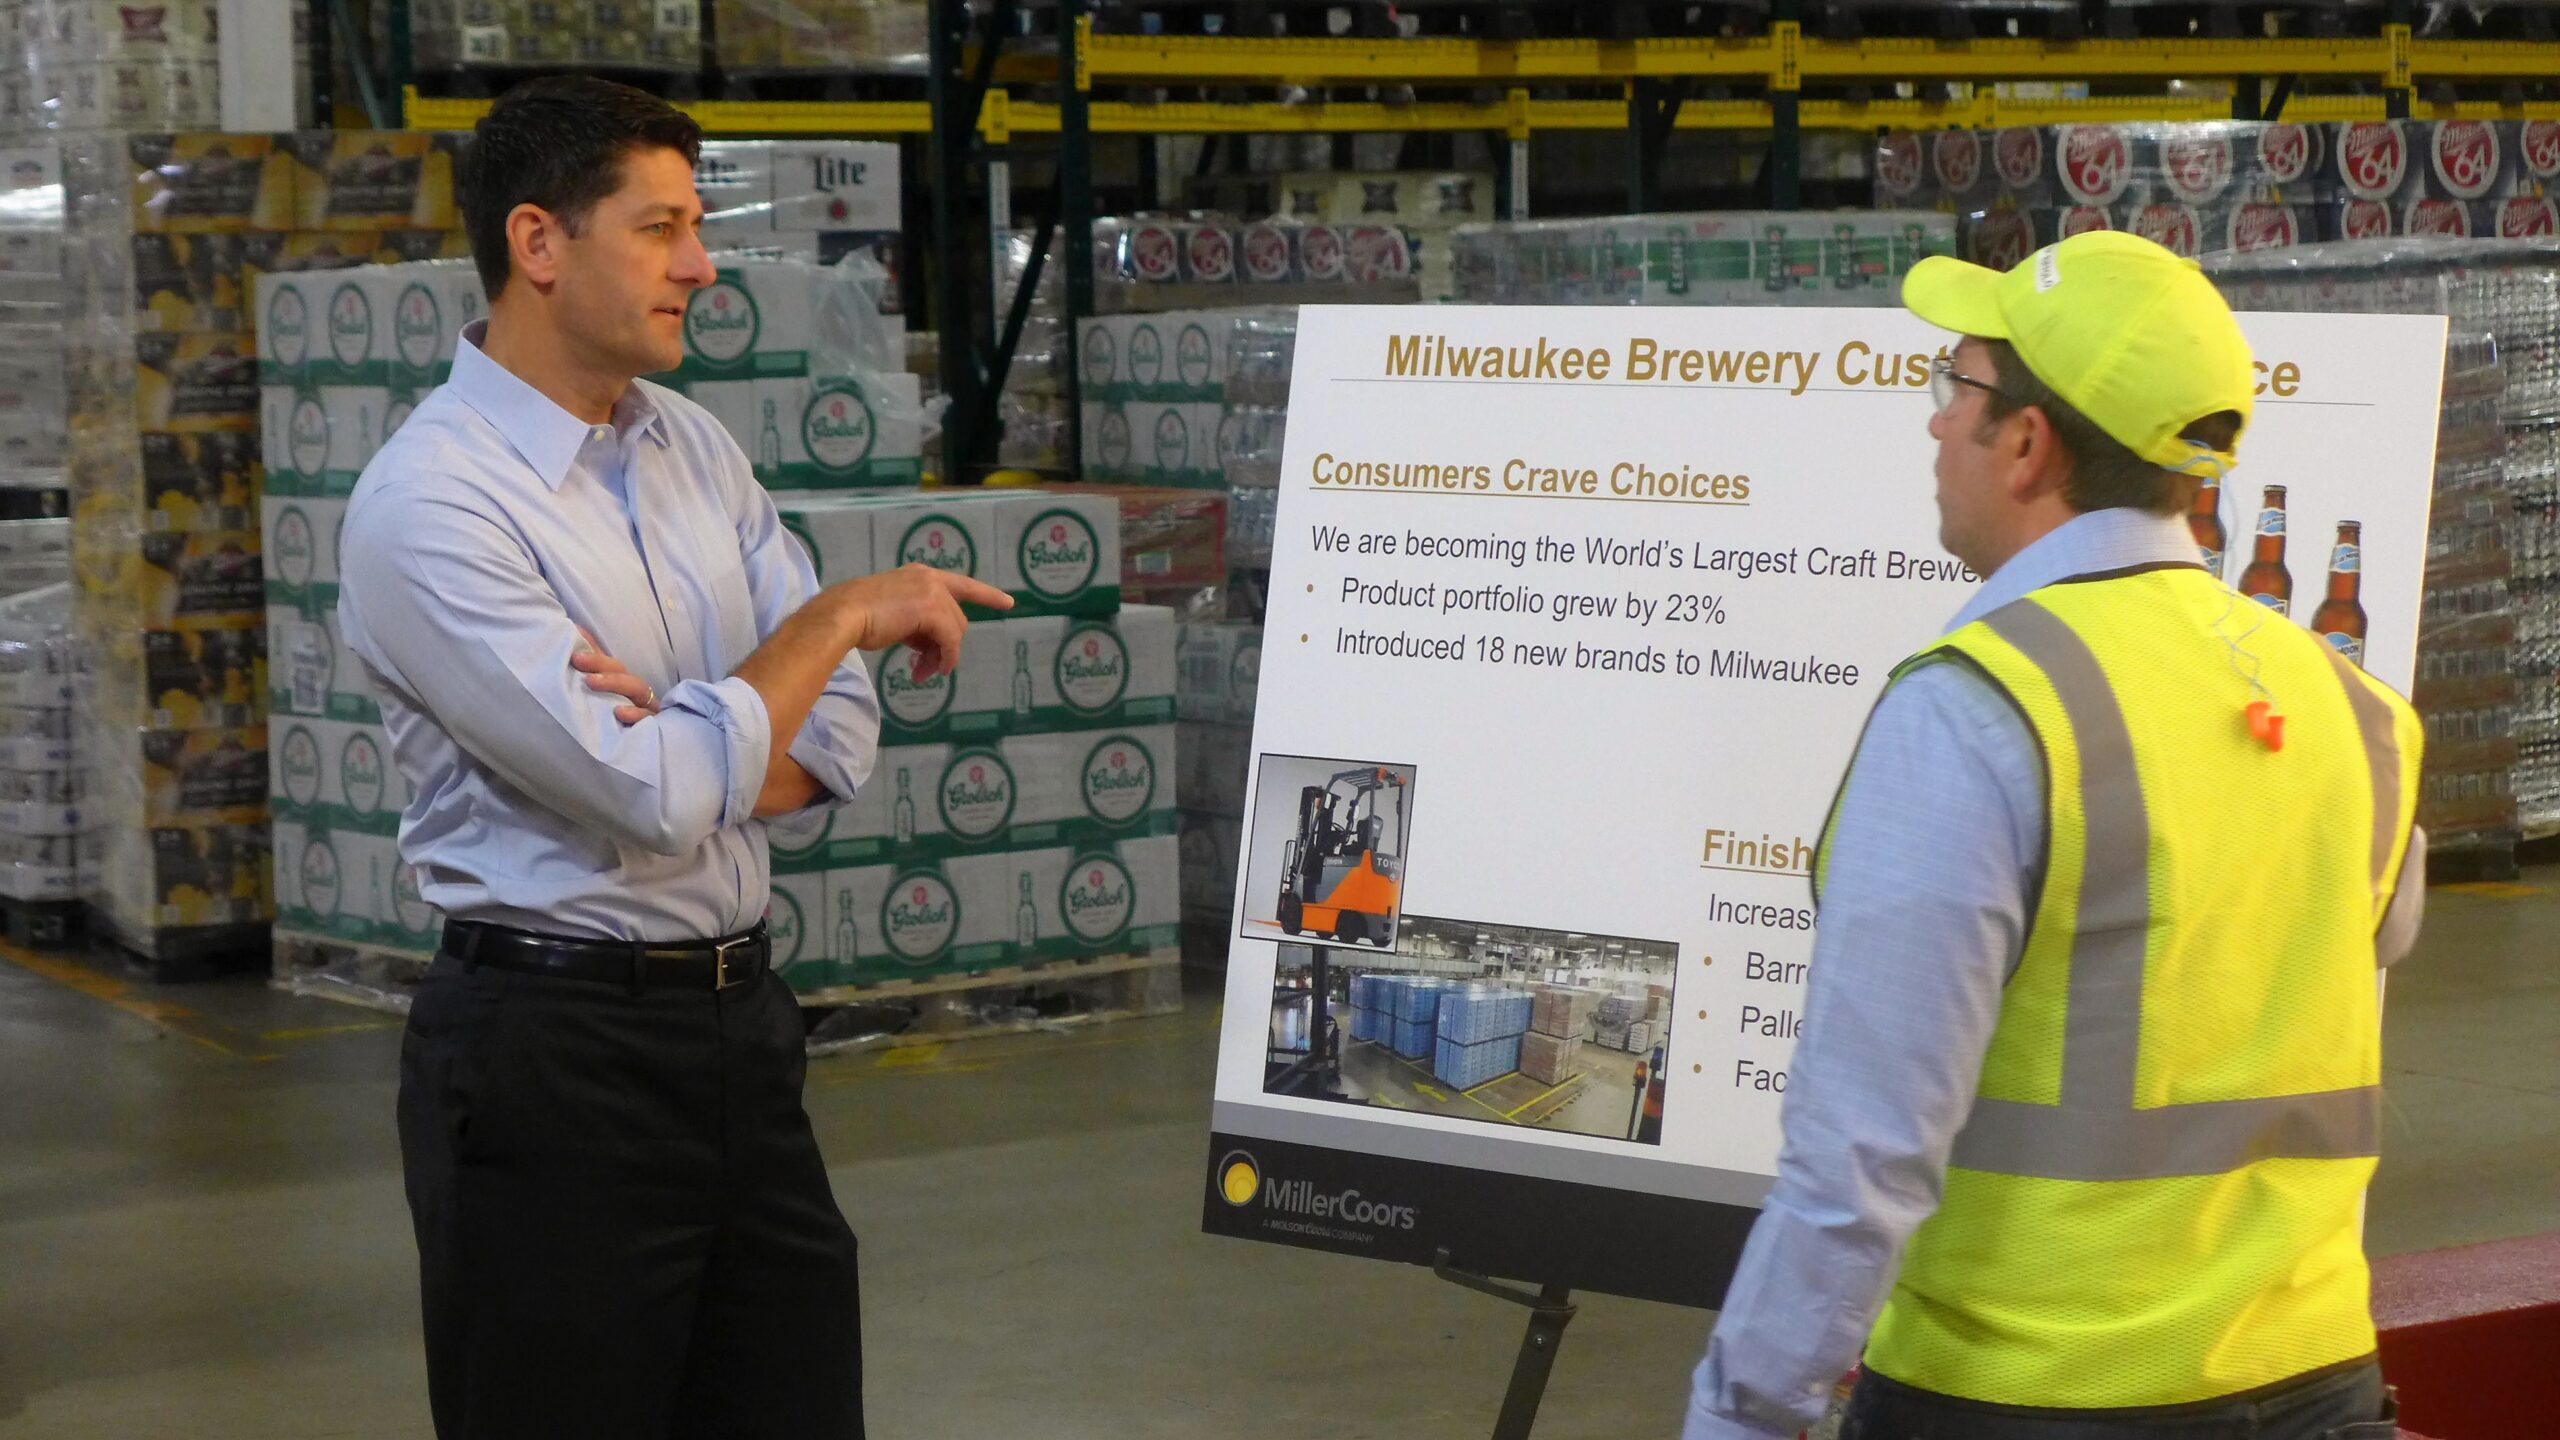 House Speaker Paul Ryan met with Tom Ruffulo, the customer service department manager, at the Miller Brewery in Milwaukee.